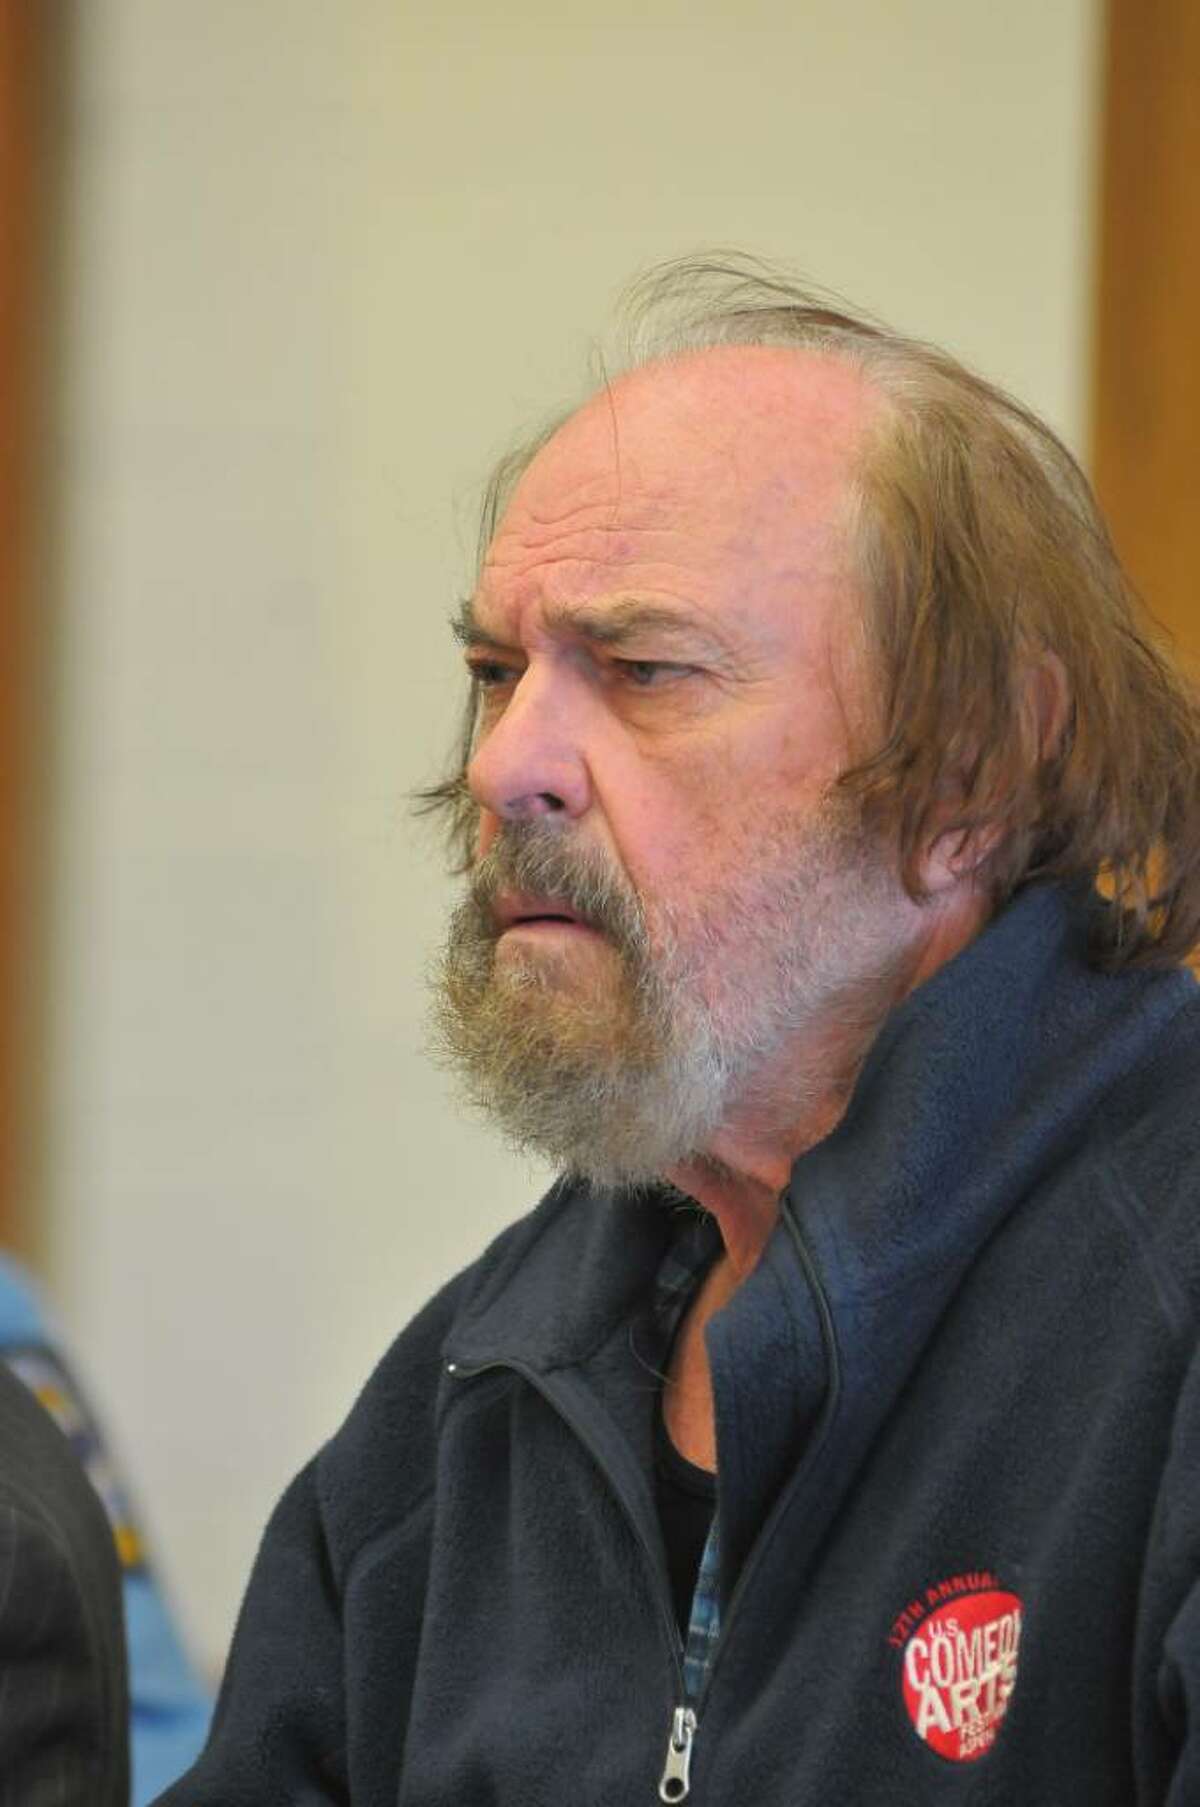 BANTAM, CT - FEBRUARY 1: Actor Rip Torn appears in Bantam Superior Court February 1, 2010 in Bantam, Connecticut. Torn was arraigned on charges of criminal trespass, carrying a gun without a permit, carrying a gun while intoxicated, burglary and criminal mischief and was released on a $100,000 bond. Police responding to an alarm found Torn in the Litchfield Bancorp branch's lobby Friday night after he reportedly broke into the bank though a window while intoxicated. (Photo by Jim Shannon-Pool/Getty Images) *** Local Caption *** Rip Torn